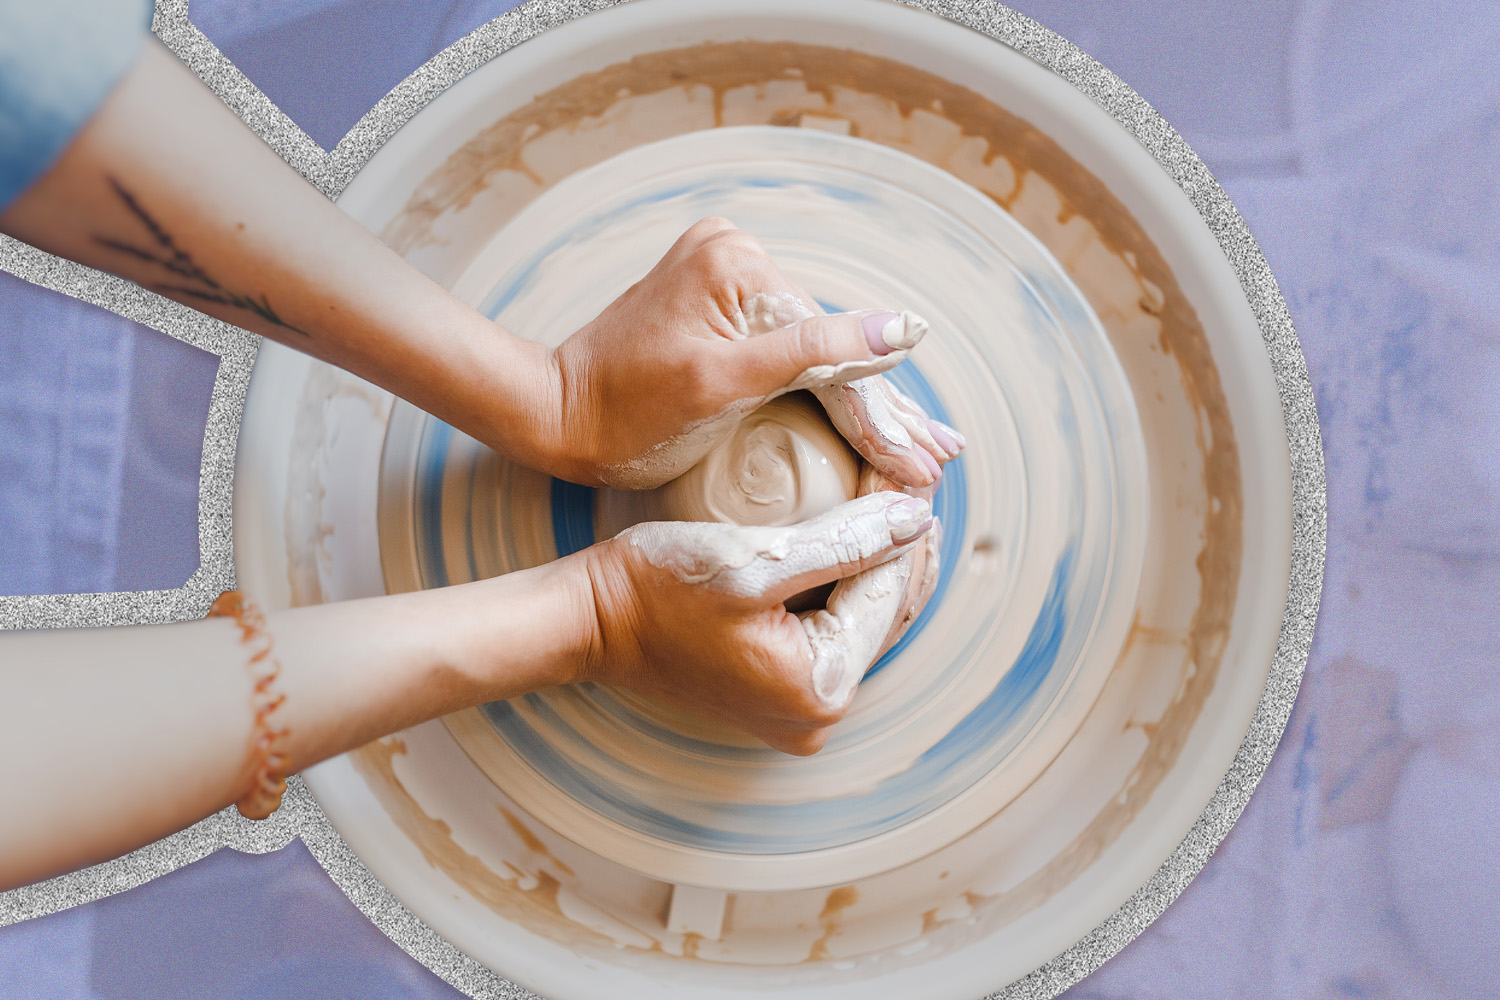 Illustration of person molding pottery on a pottery wheel